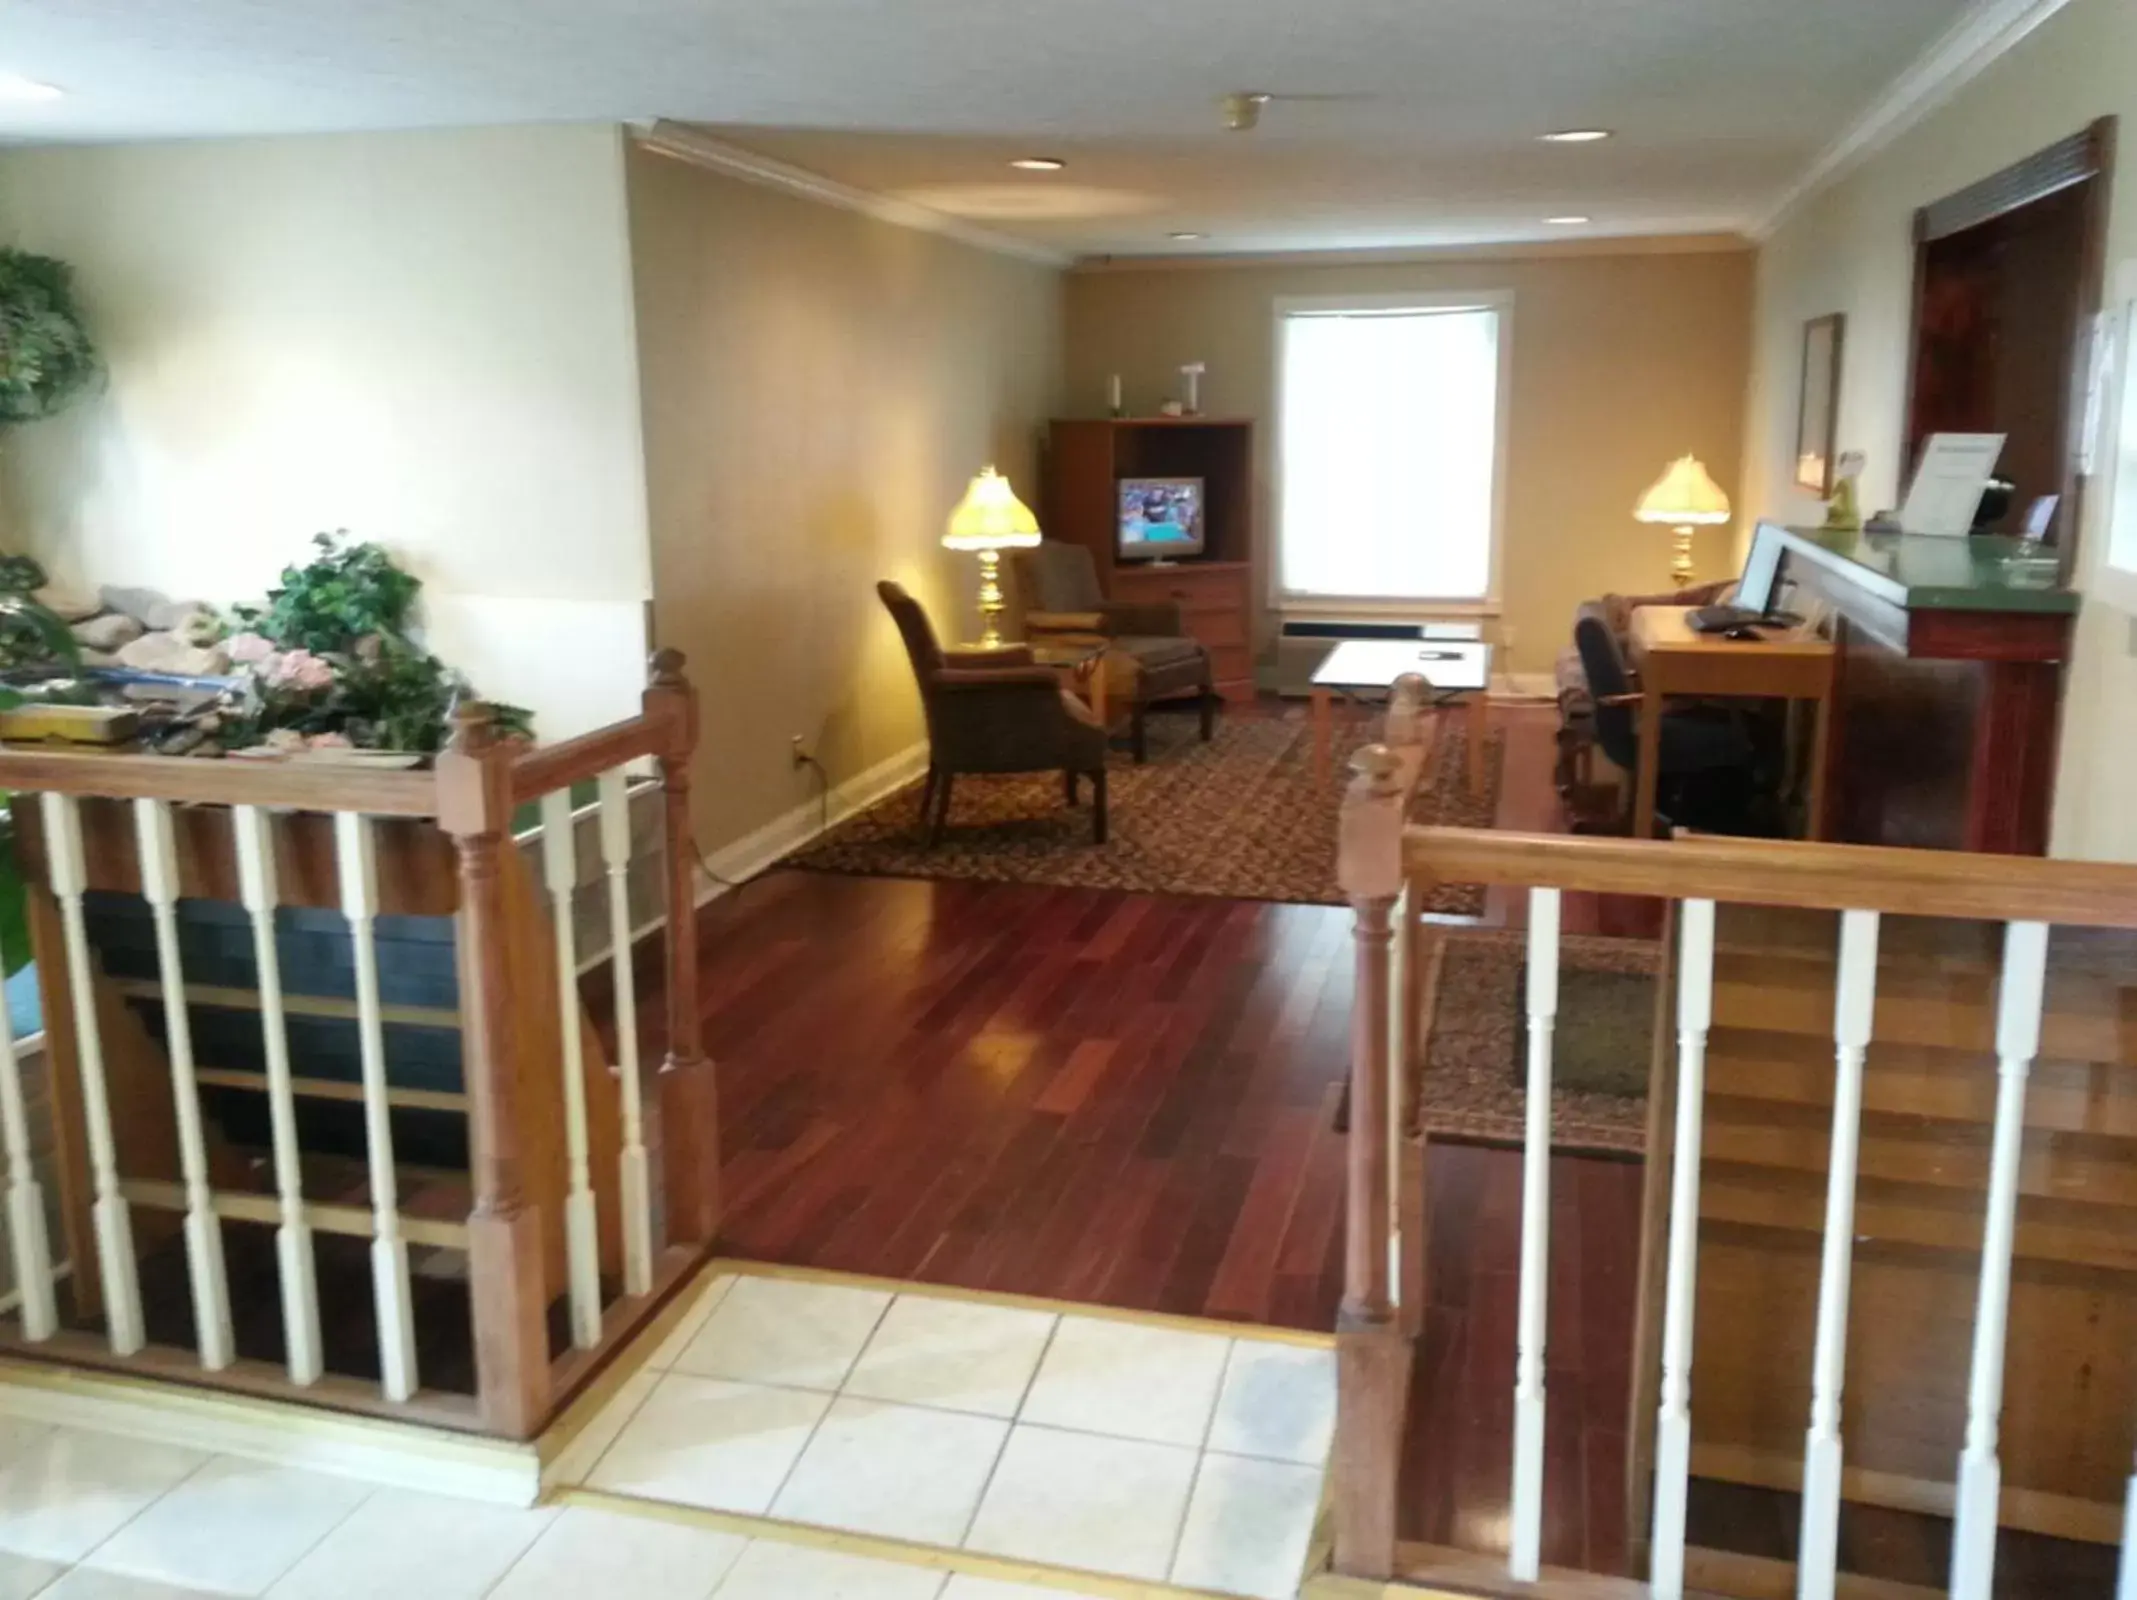 Lobby or reception in Americourt Hotel and Suites - Elizabethton